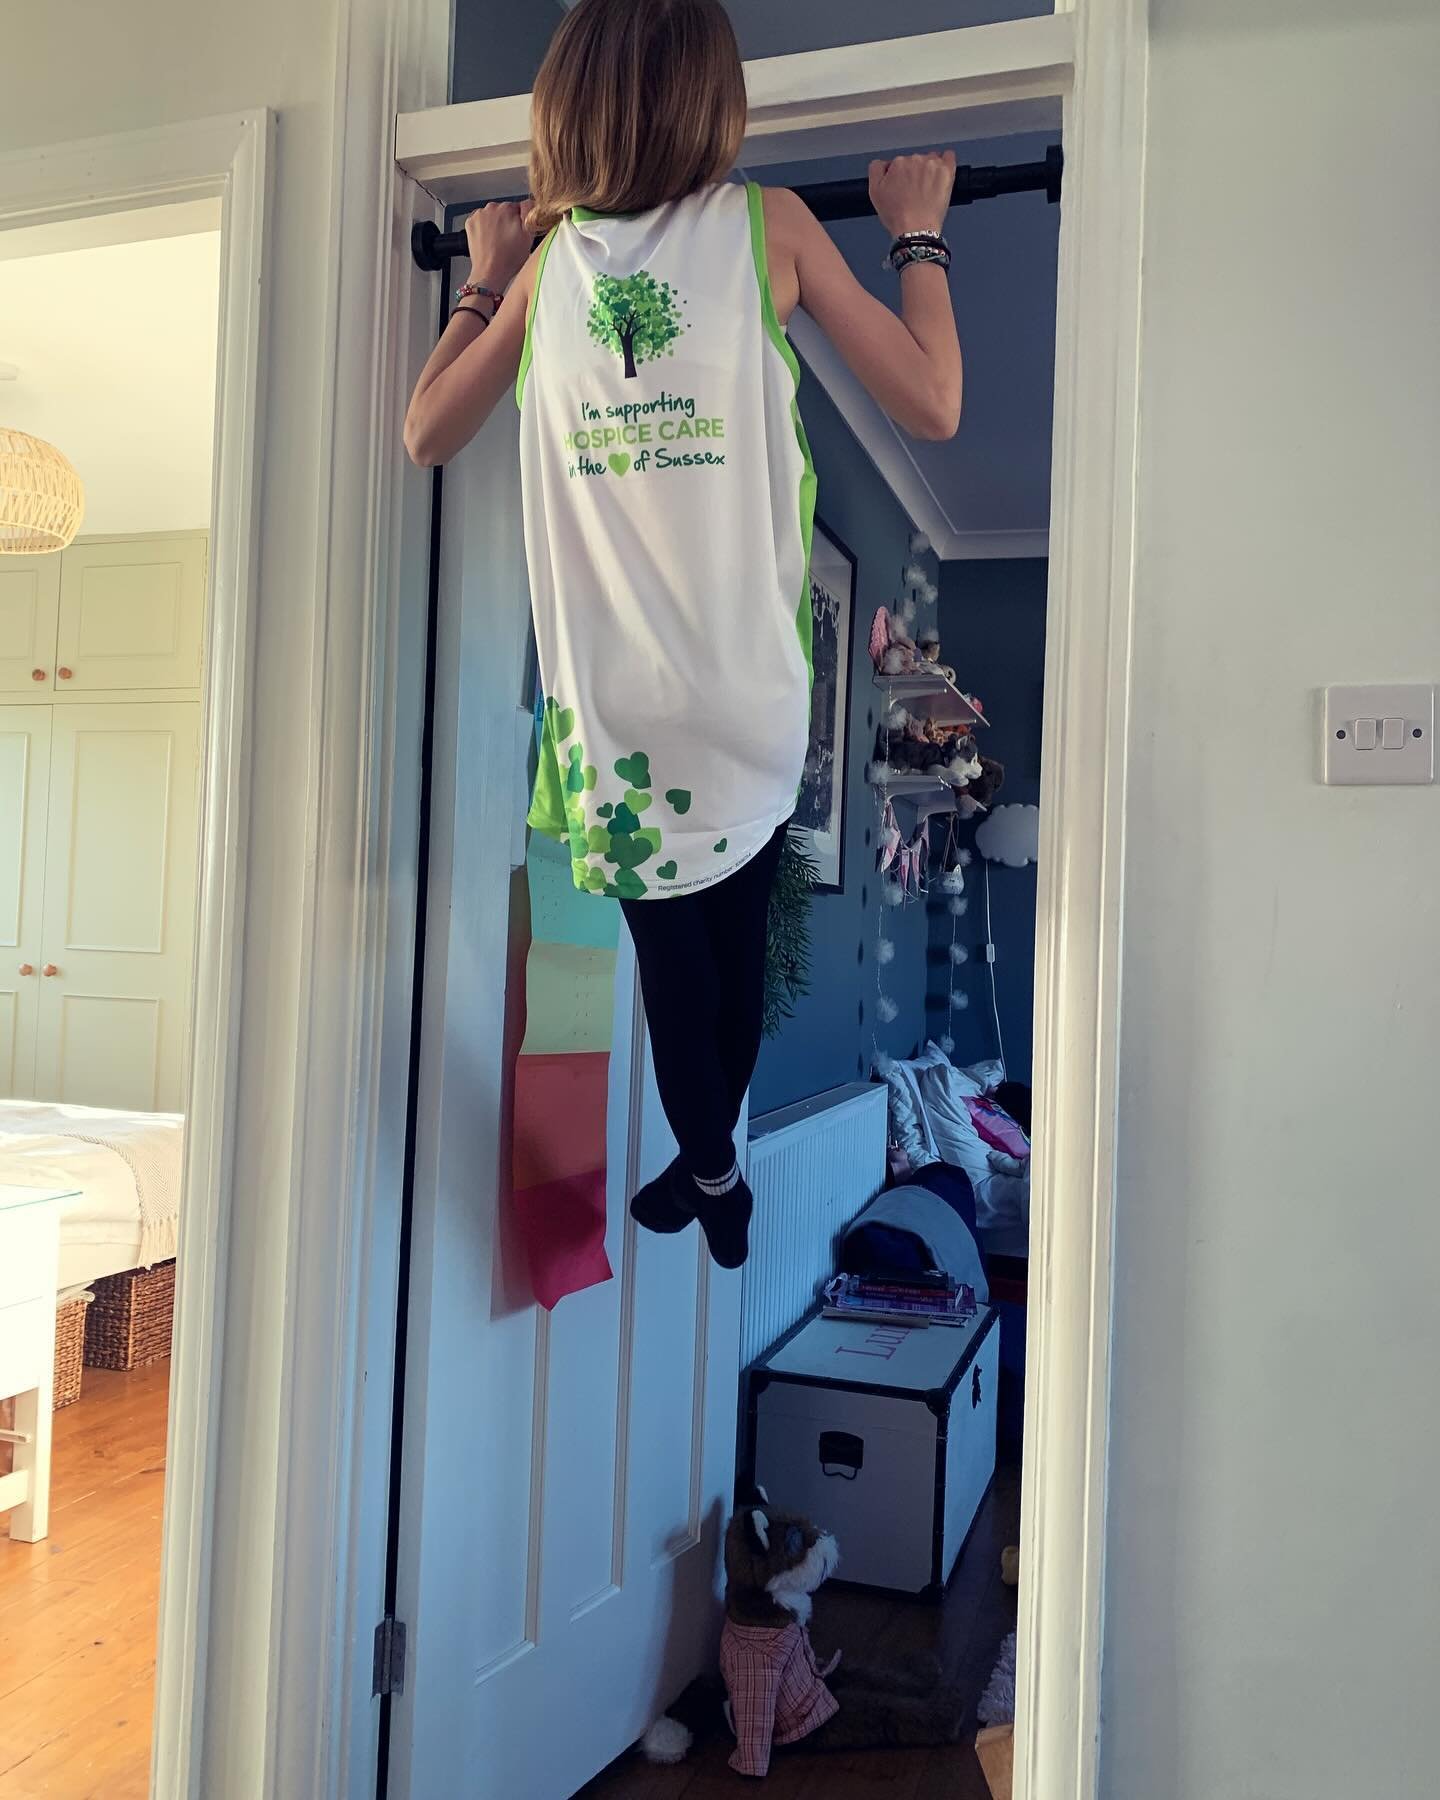 This week Luna is doing a pull up challenge raising money for @stpeterstjames hospice where her grandad (my dad) spent his final days. The hospice is an amazing place that provides care for people with life limiting illness and support for their fami